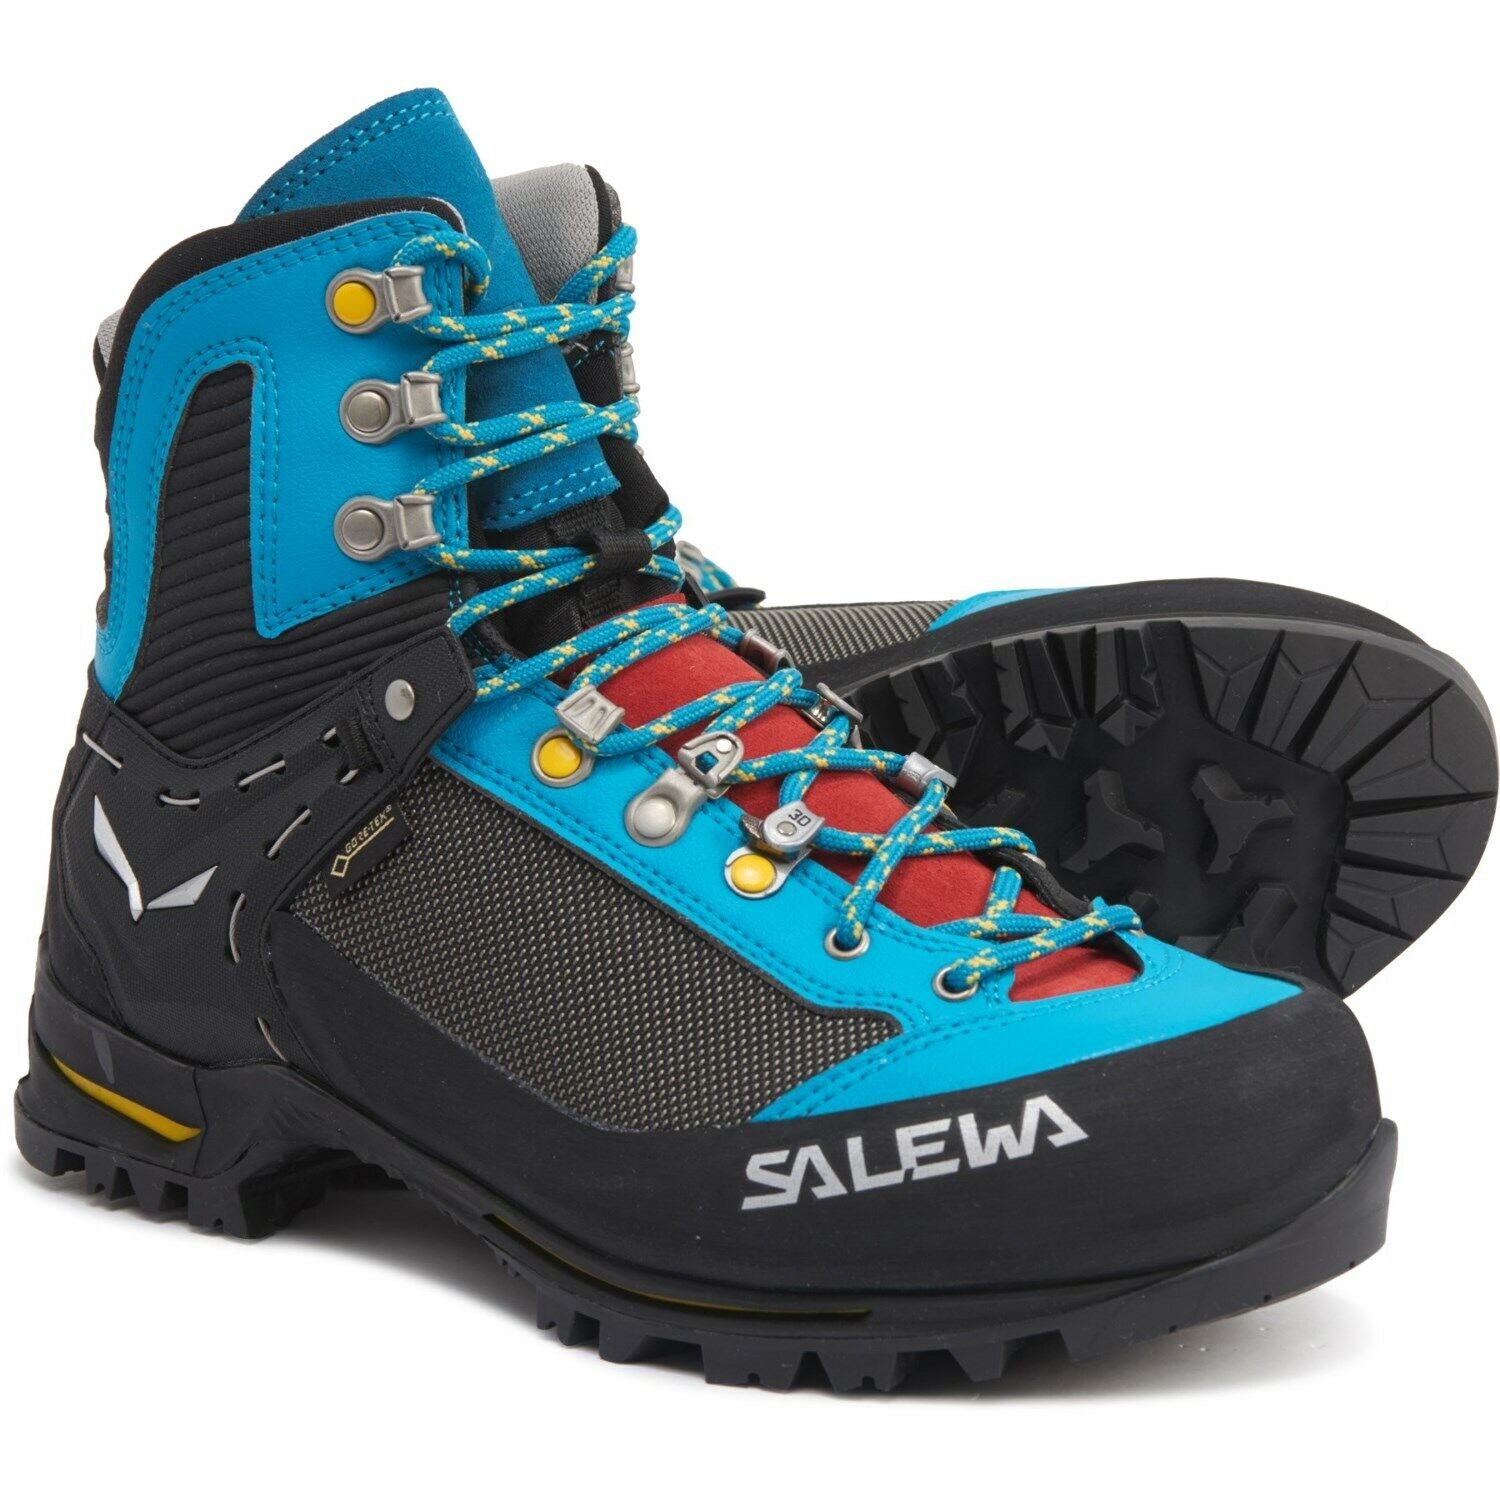 How to Turn Your Men’s Mountaineering Boots into Lethal Weapons ...